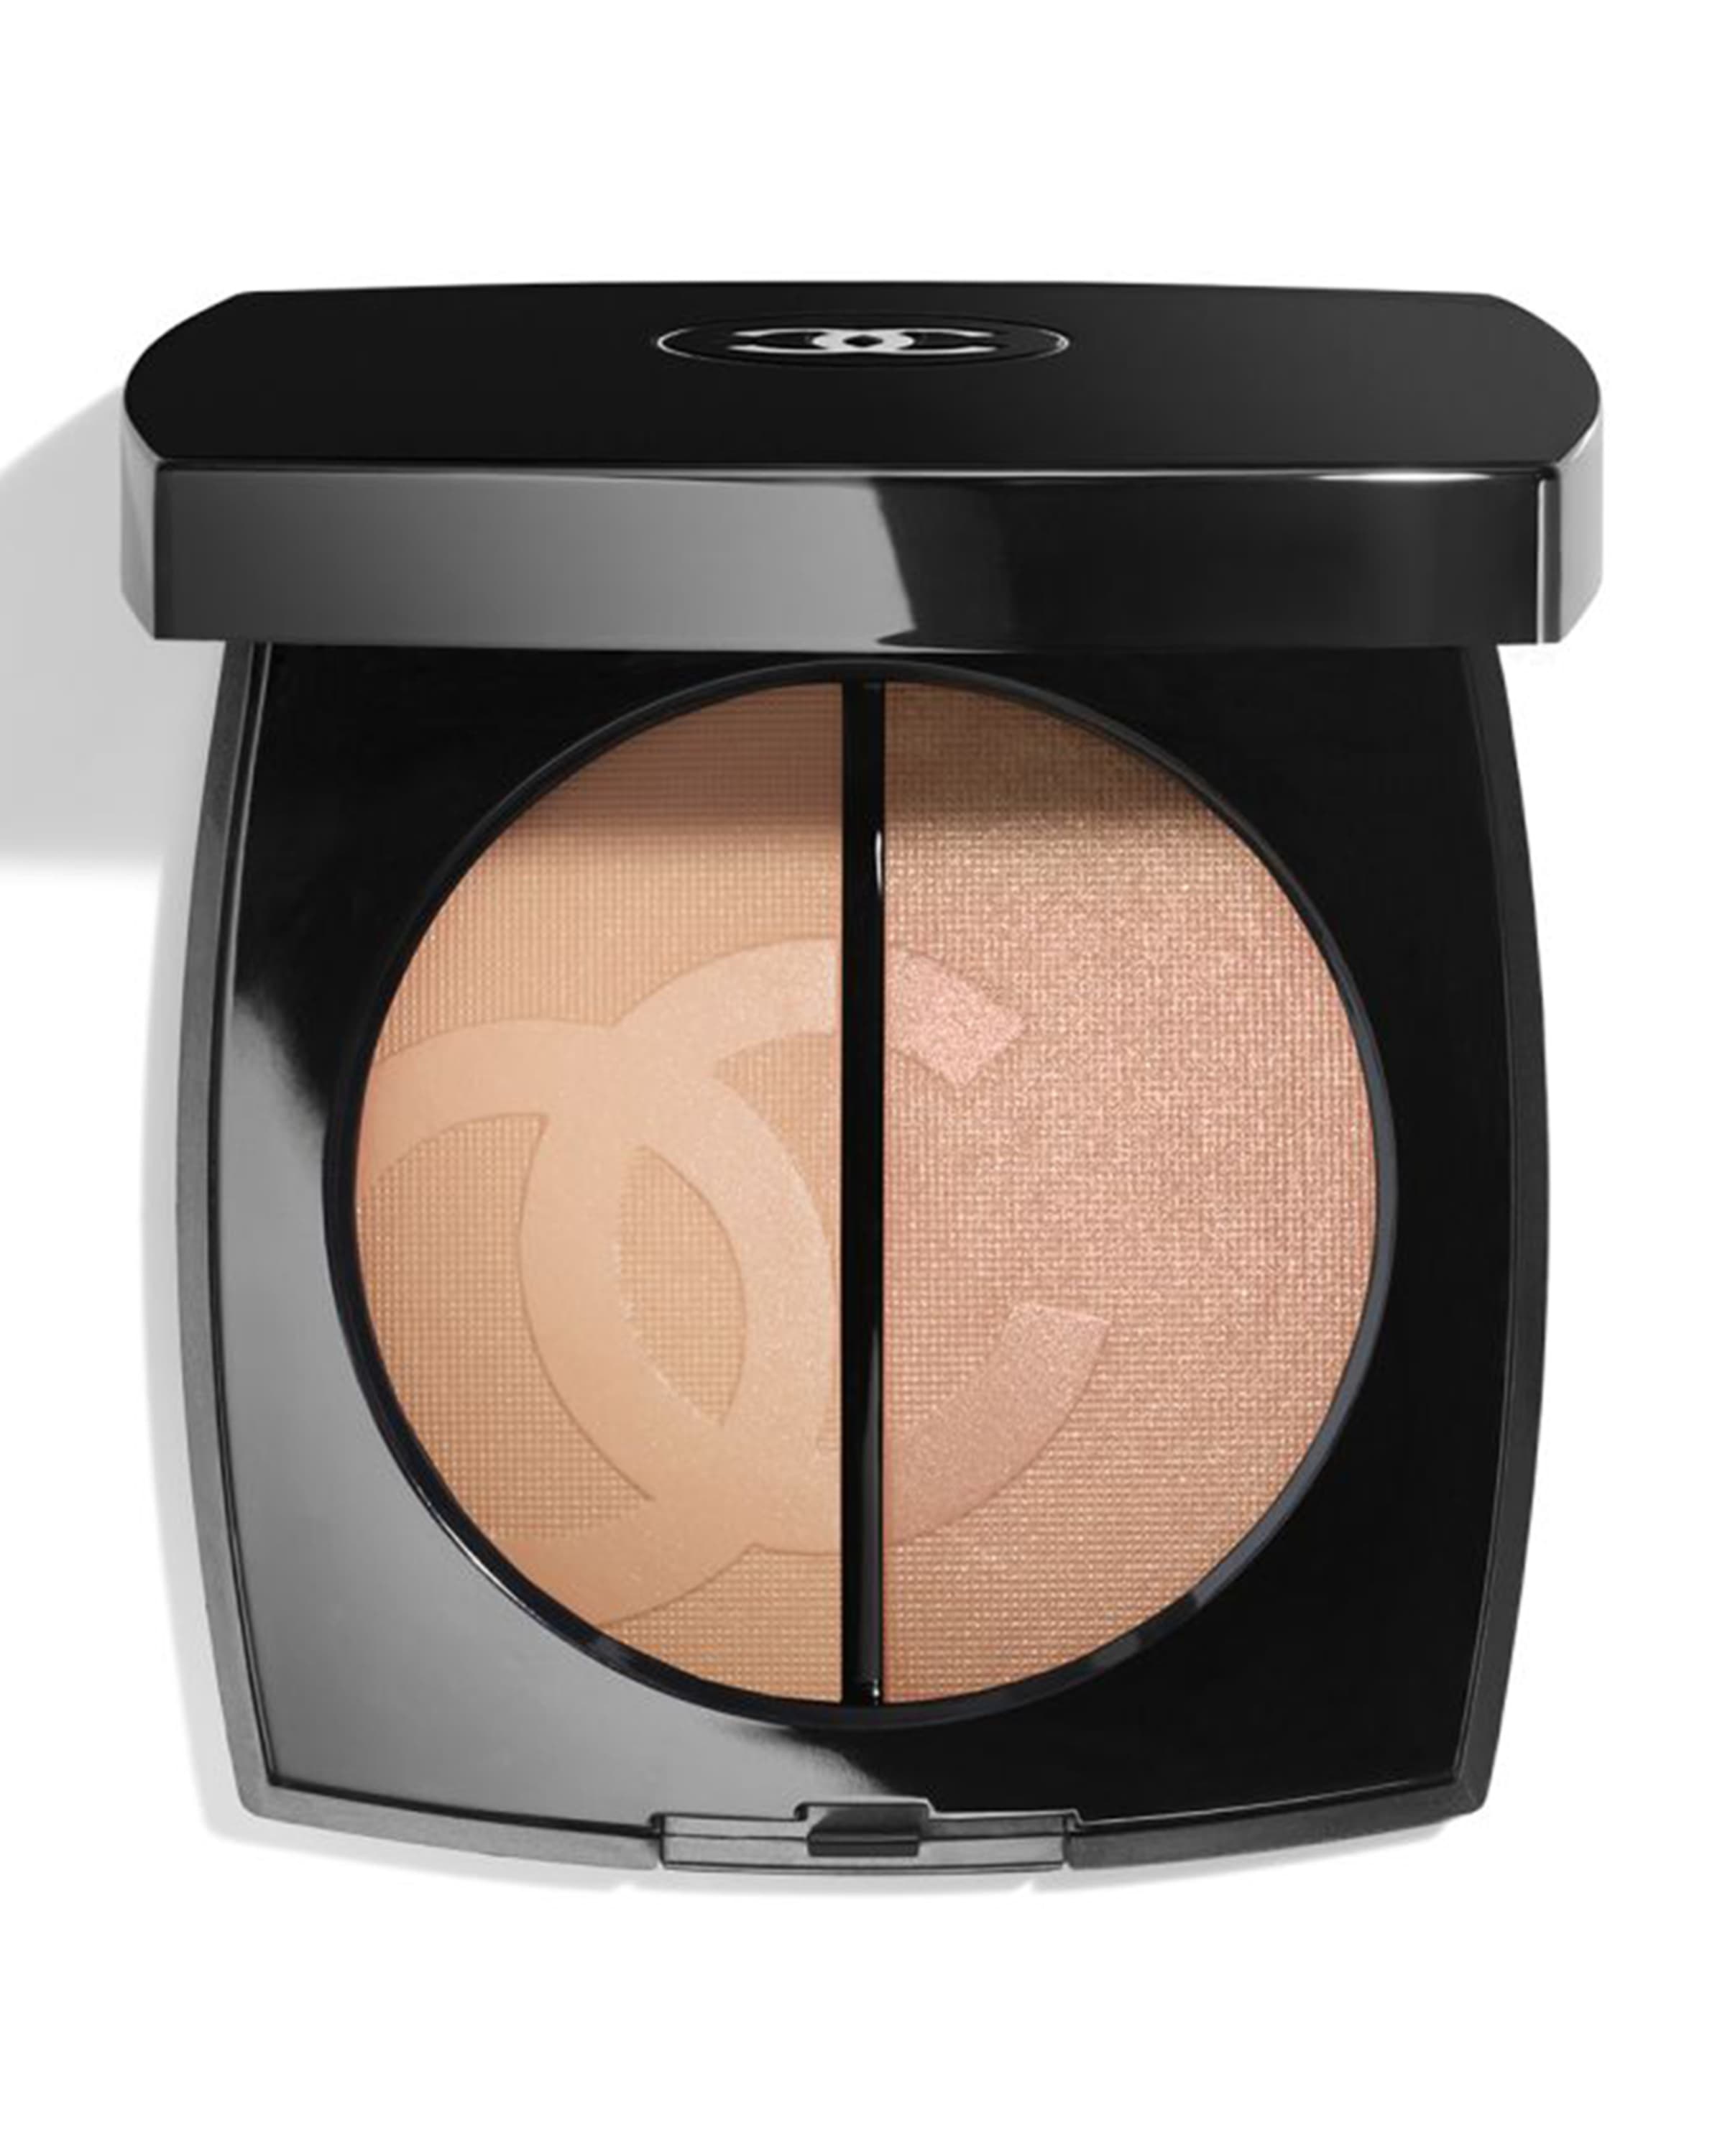 CHANEL DUO BRONZE ET LUMIÈRE Limited Edition Cruise Collection and Highlighter Duo | Neiman